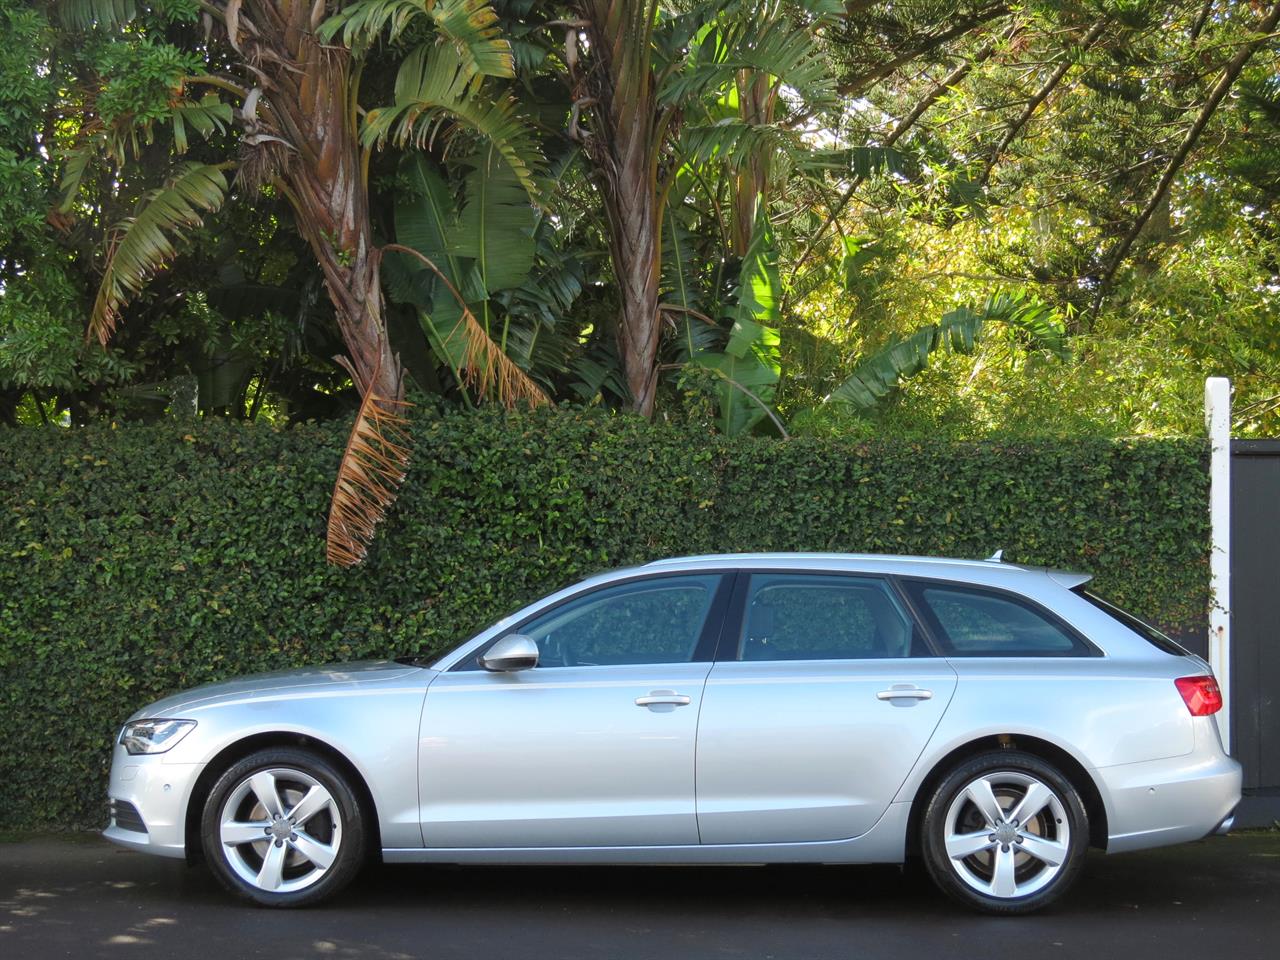 2013 Audi A6 only $61 weekly